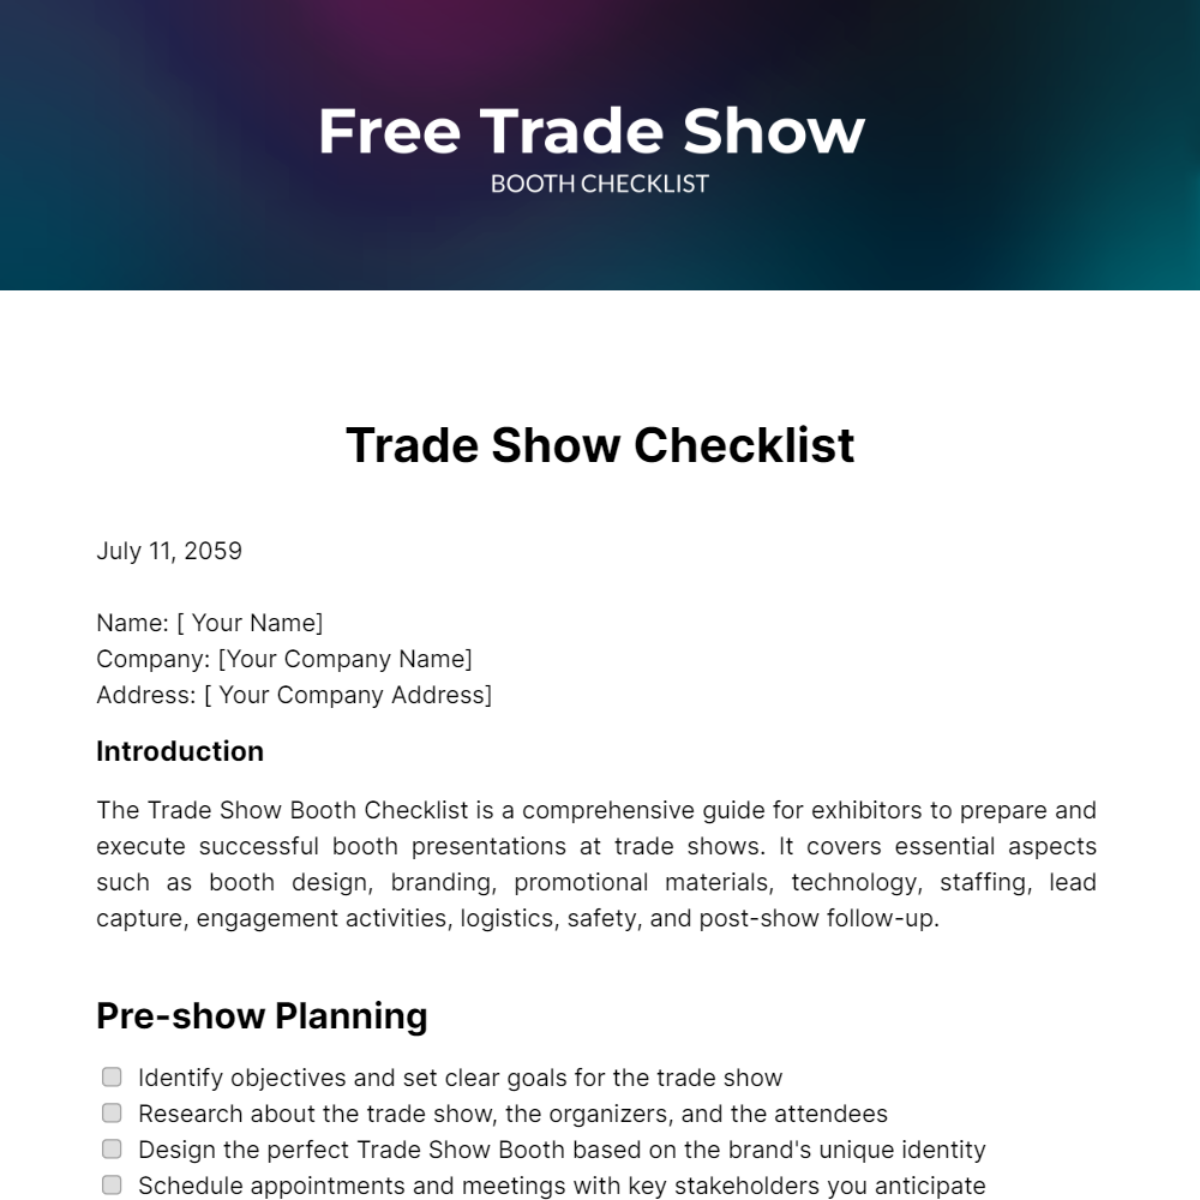 Free Trade Show Booth Checklist Template